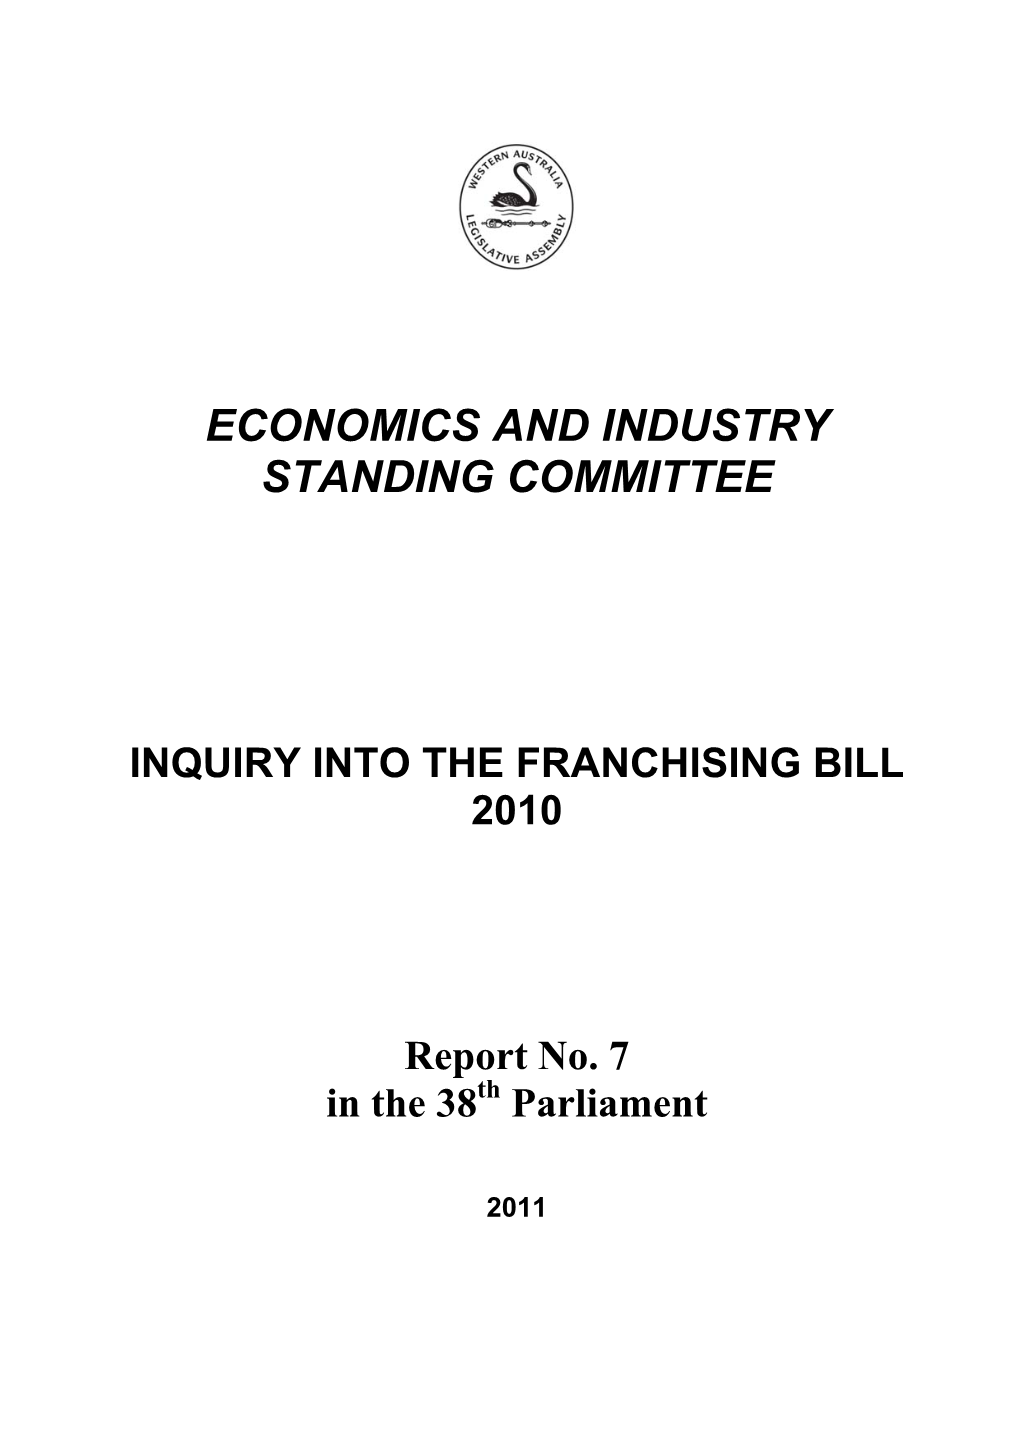 Inquiry Into the Franchising Bill 2010